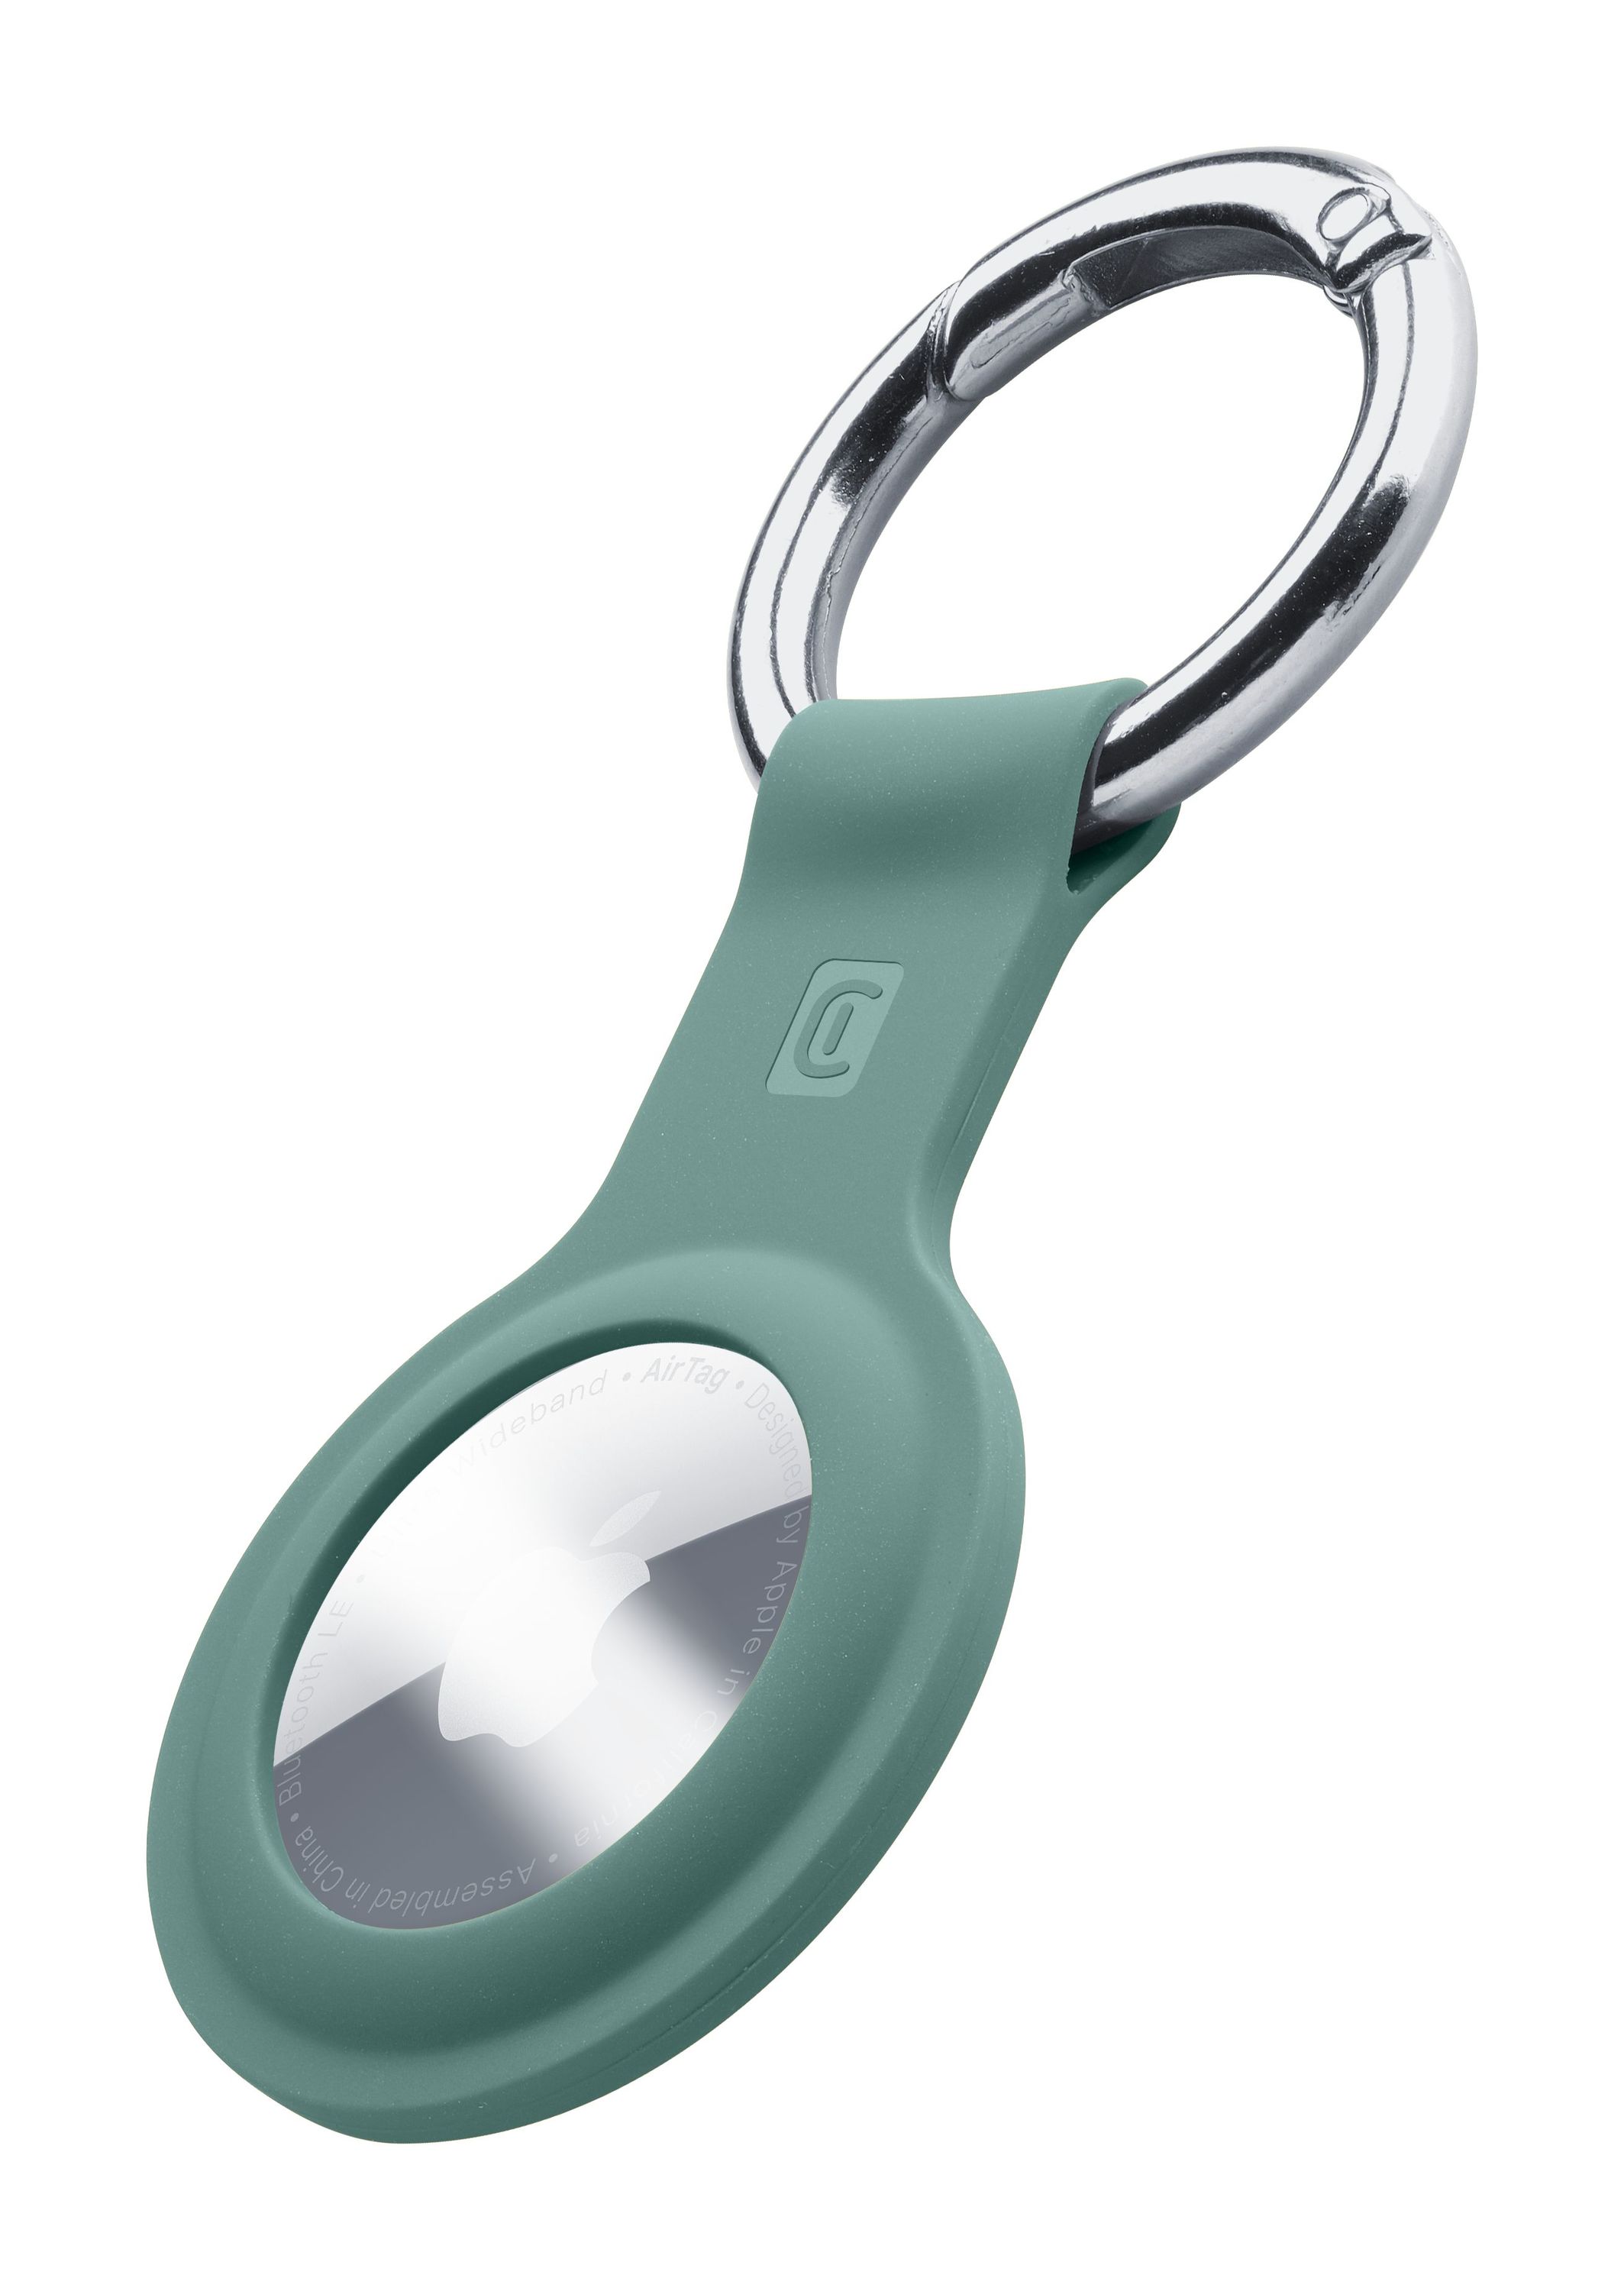 Key Ring - AirTag, Autre, Protection et Style